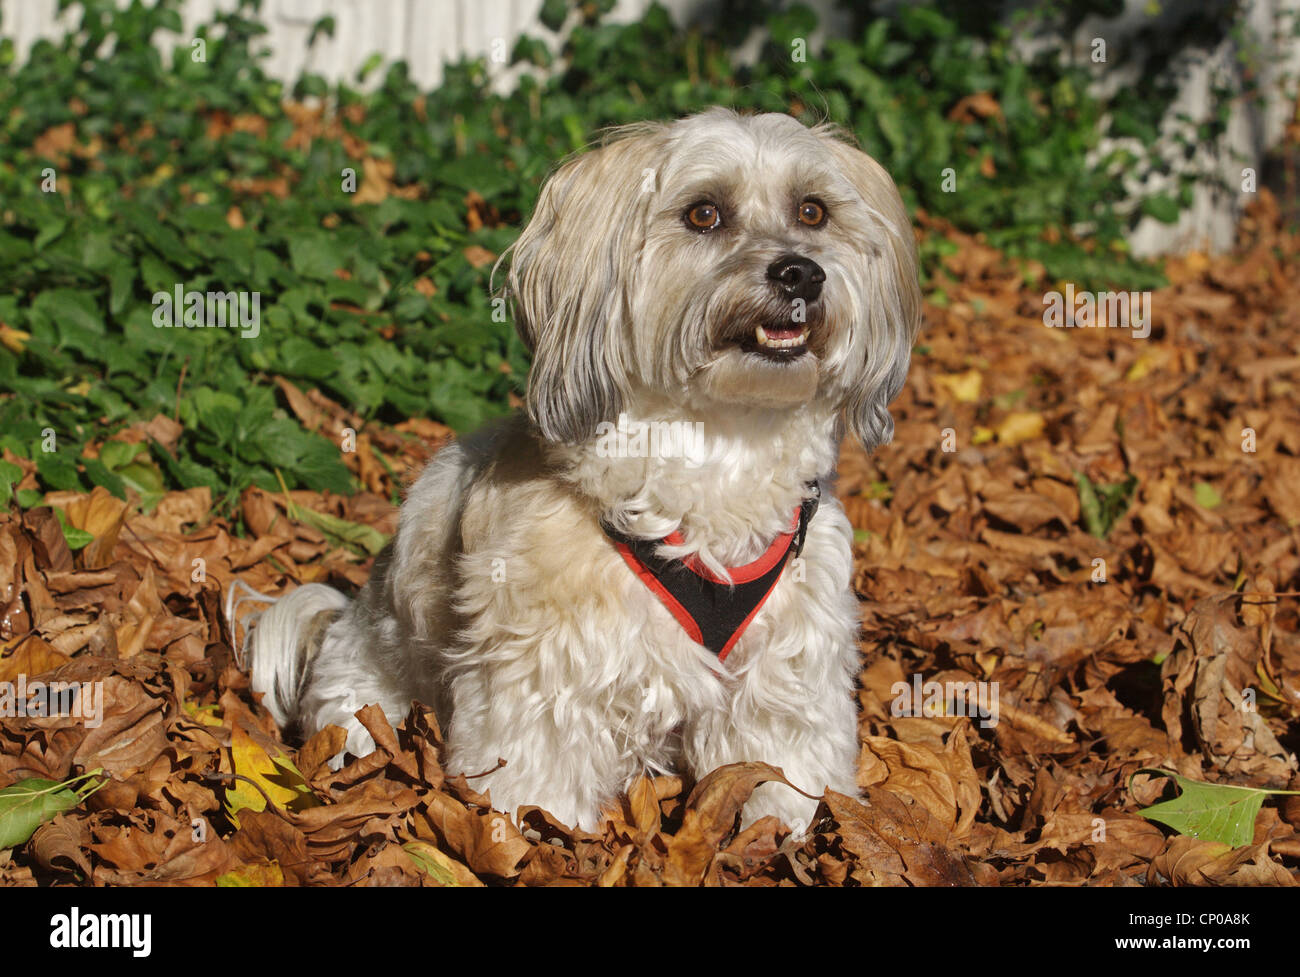 Havanese (Canis lupus f. familiaris), six years old individual sitting in foliage Stock Photo